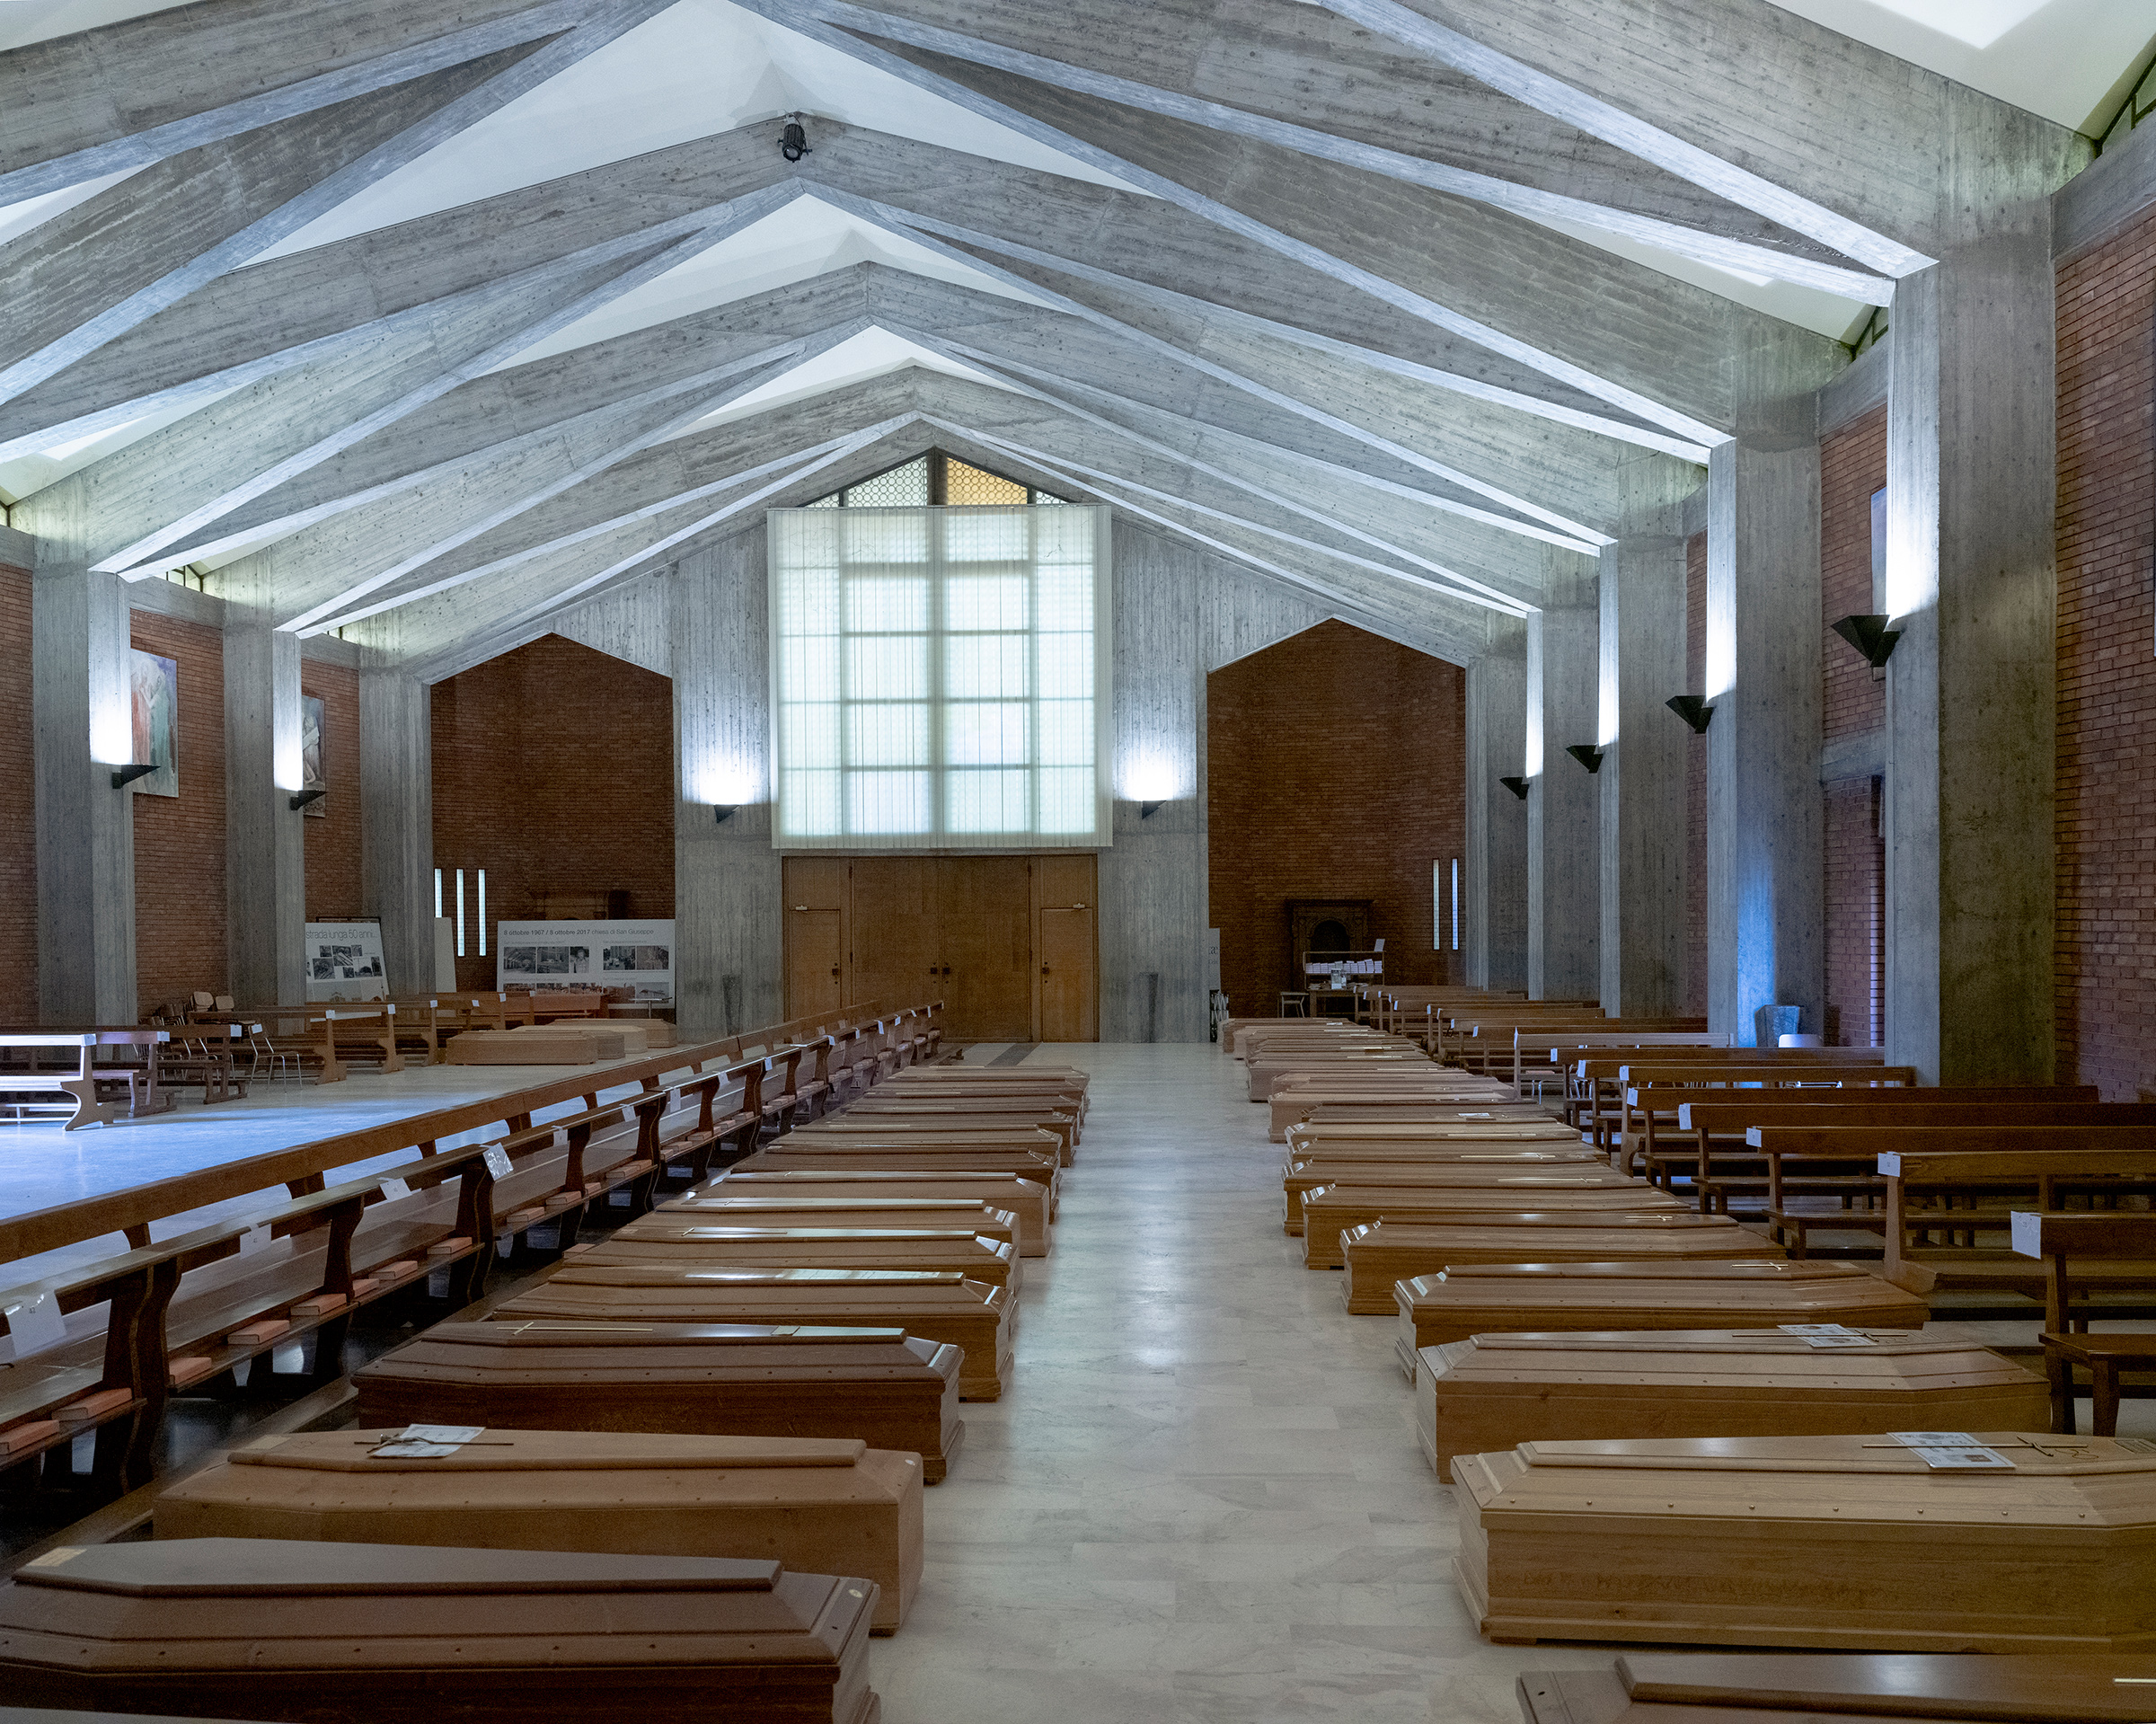 Dozens of coffins are housed inside an otherwise empty church in Seriate, near Bergamo.